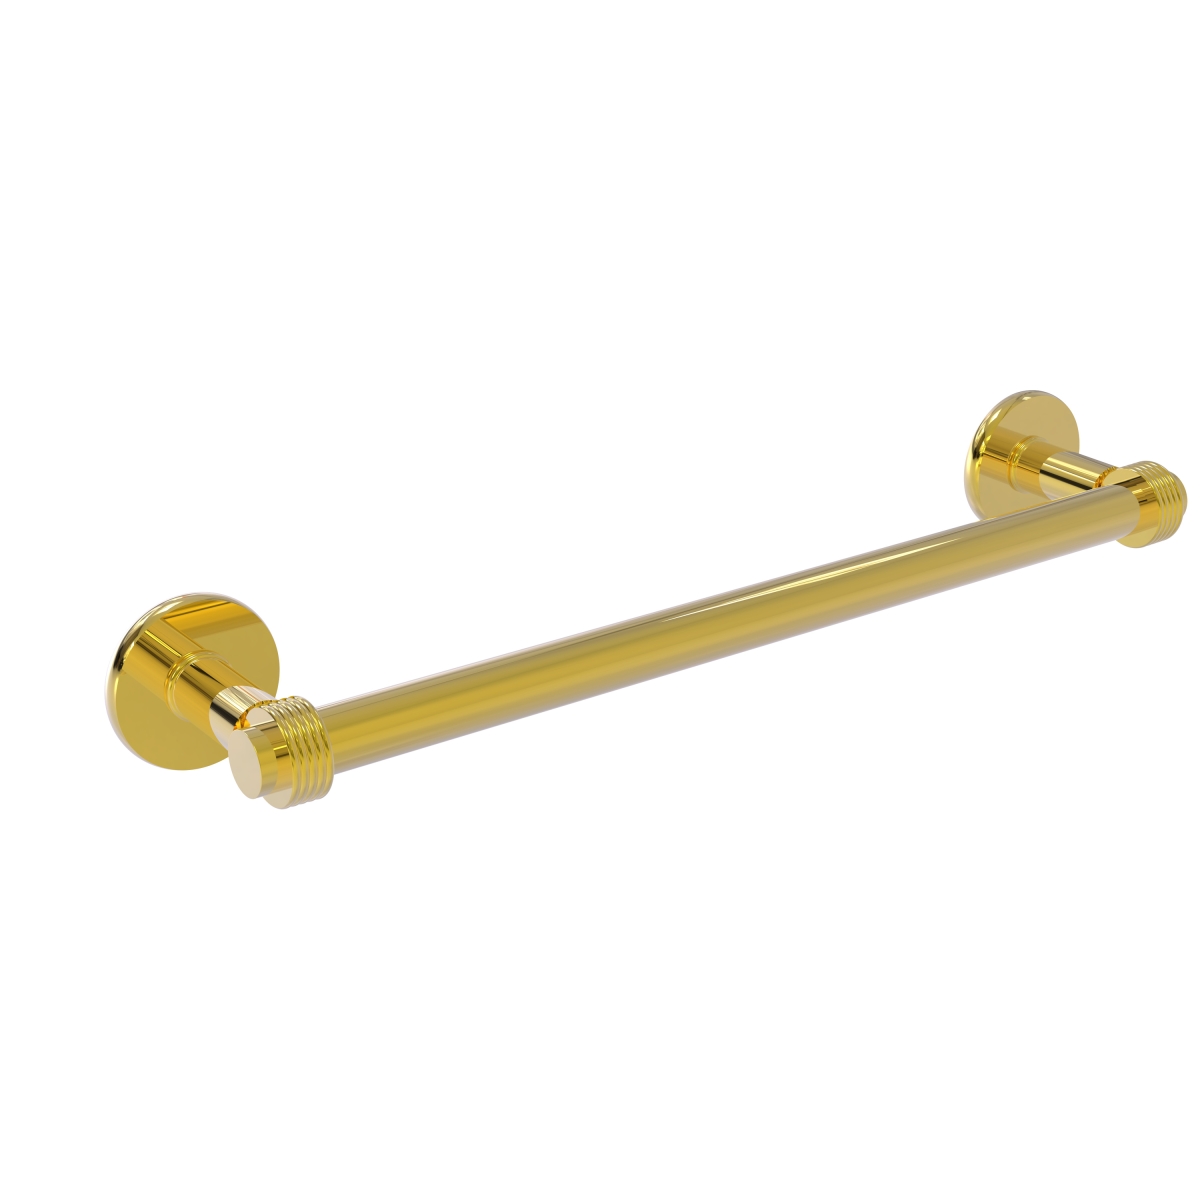 Allied Brass 2051G-24-PB 24 in. Continental Collection Towel Bar with Groovy, Polished Brass